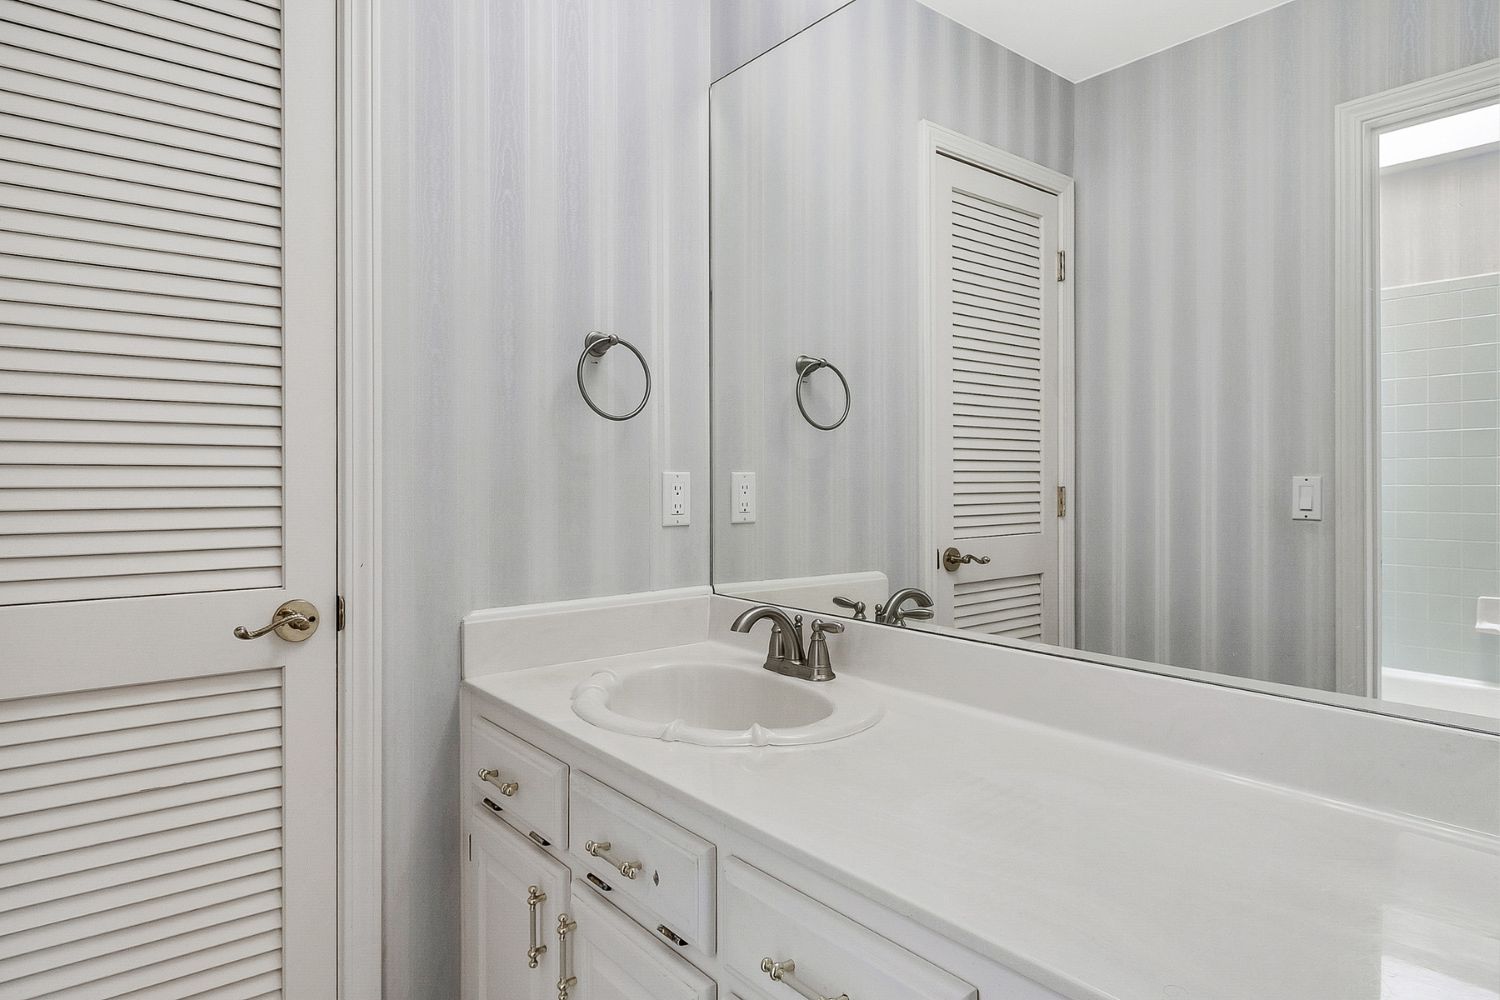 How Much Does a Bathroom Remodel Cost in New York